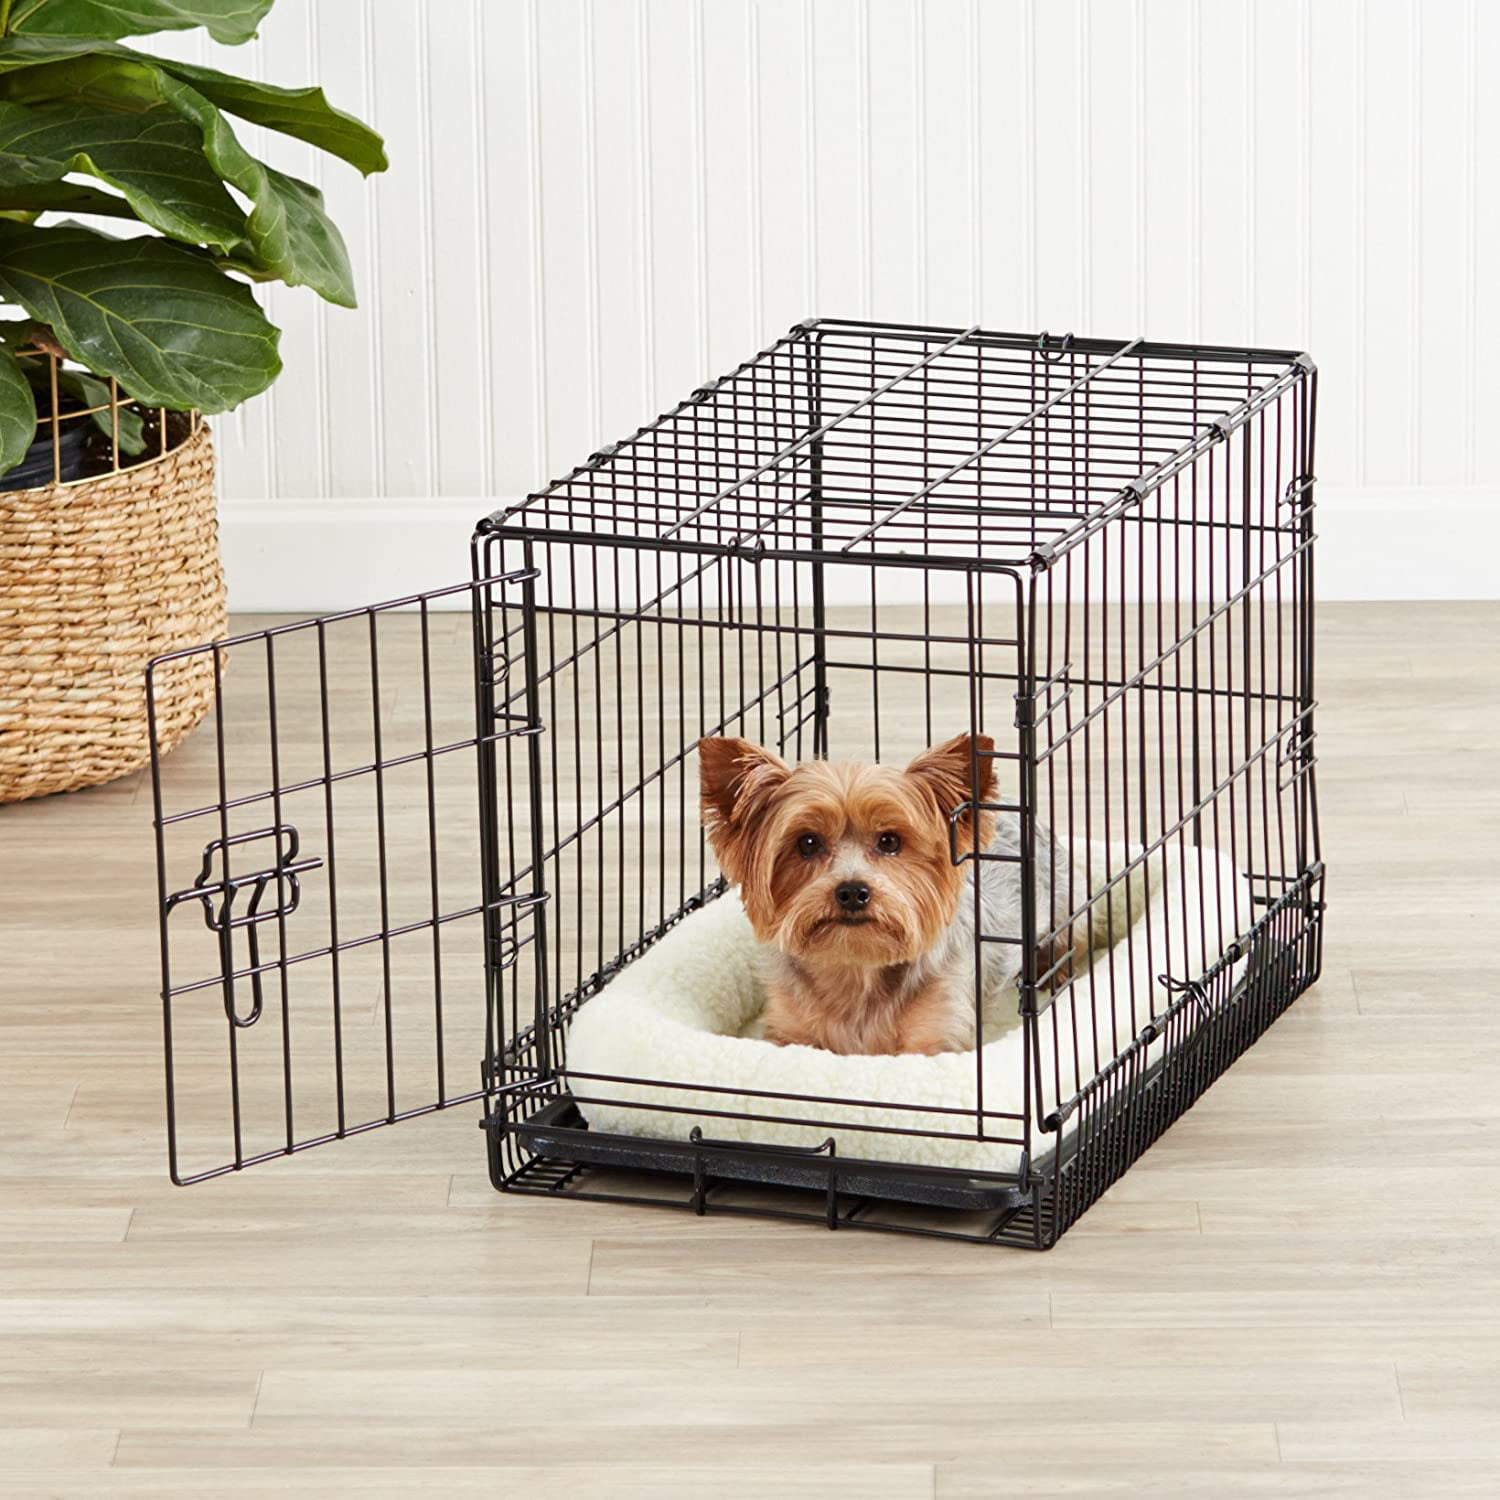 Dog Crate DoubleDoor Folding Metal Wire Pet Cage w/Divider & Tray for Training Pet Supplies